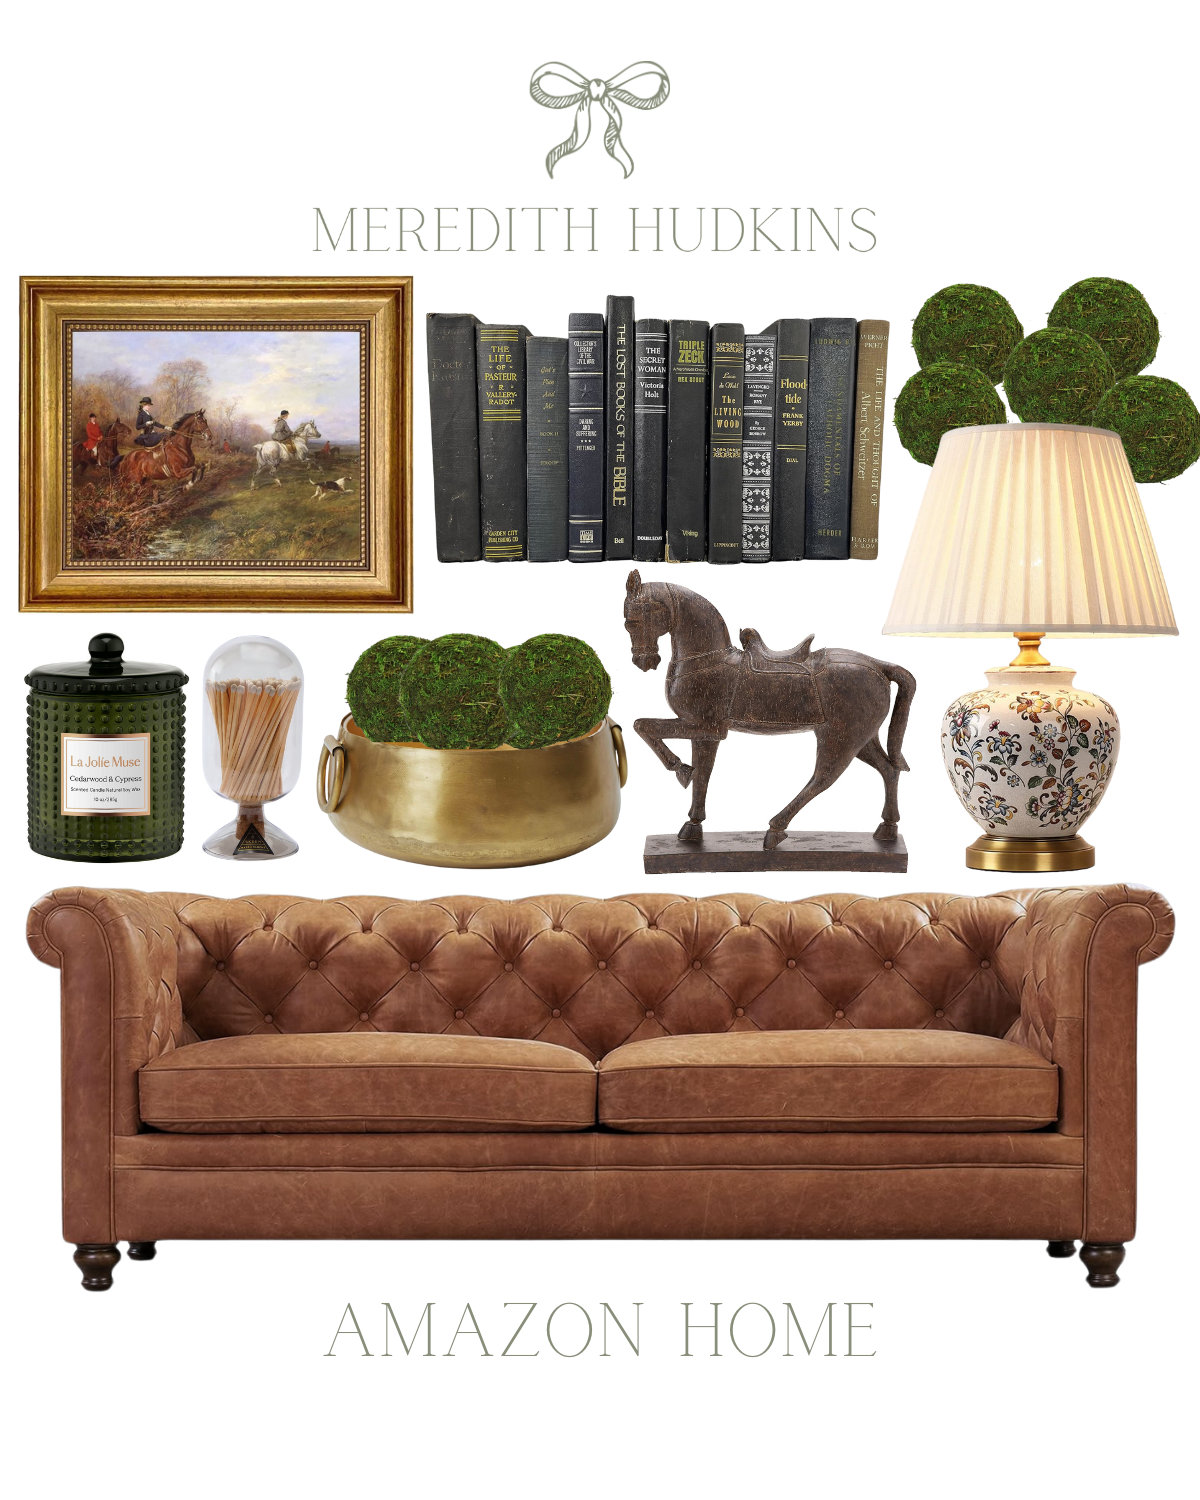 Amazon Home (2).png